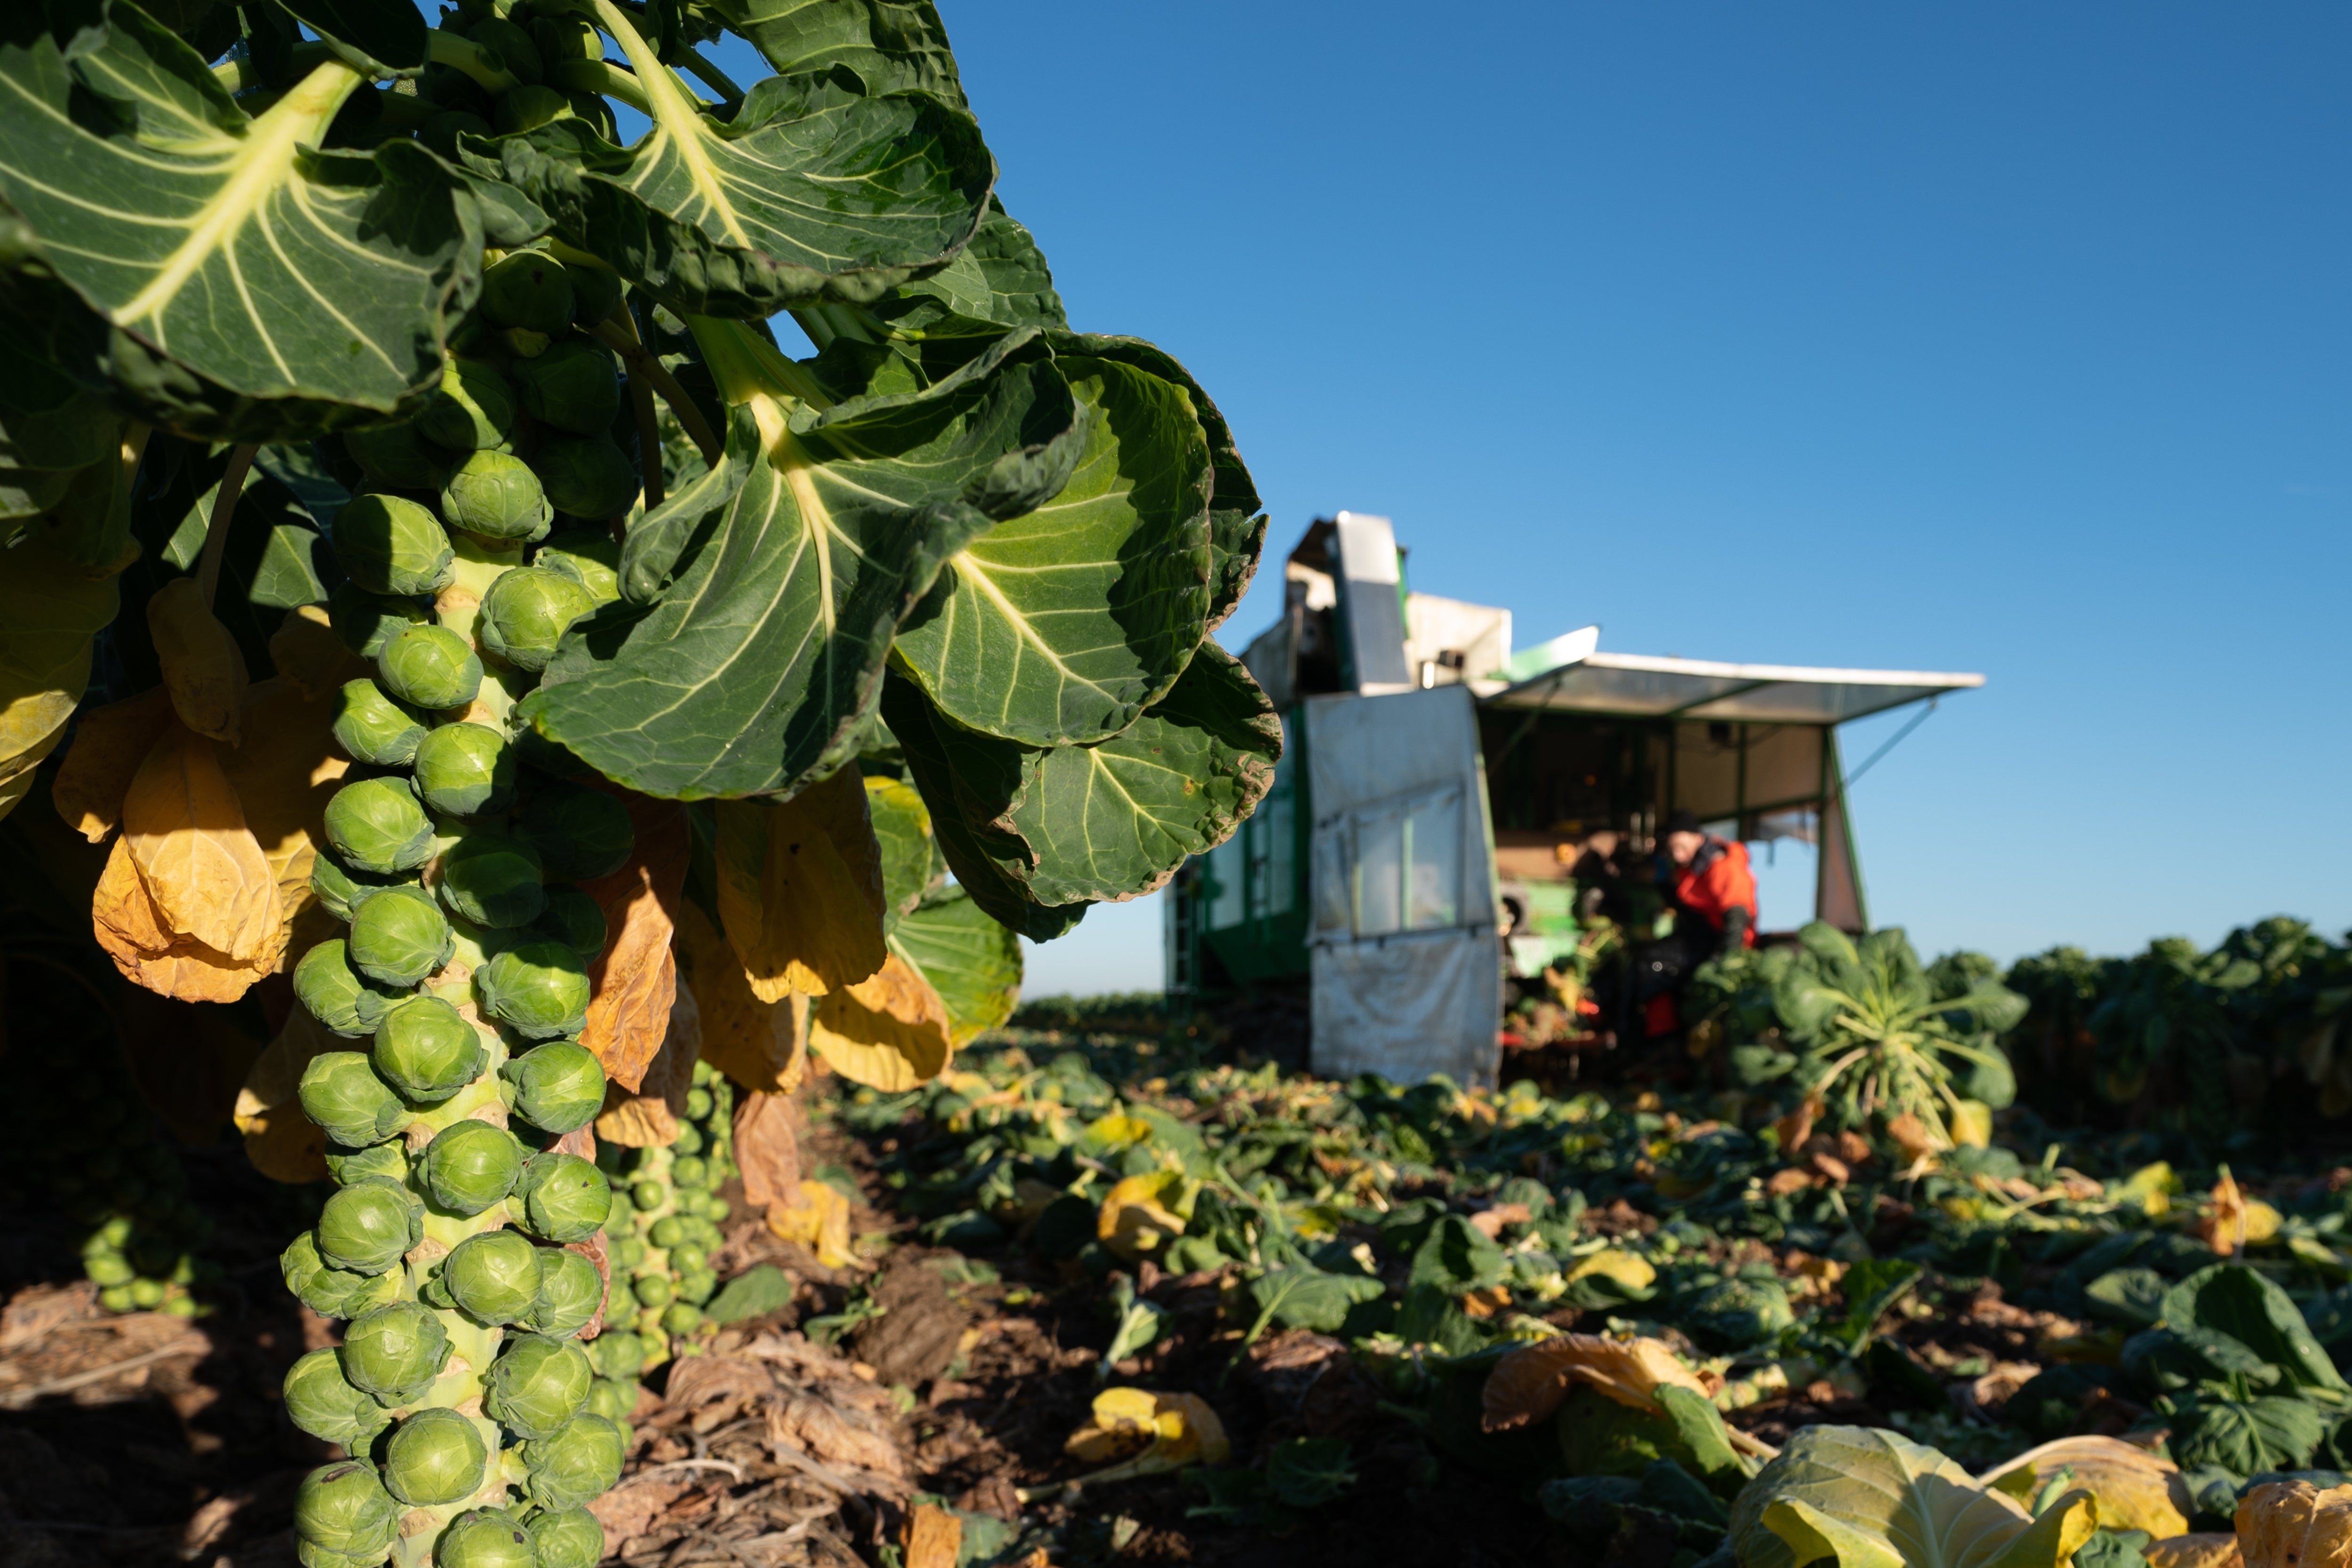 Brussels sprouts are harvested (Joe Giddens/PA)